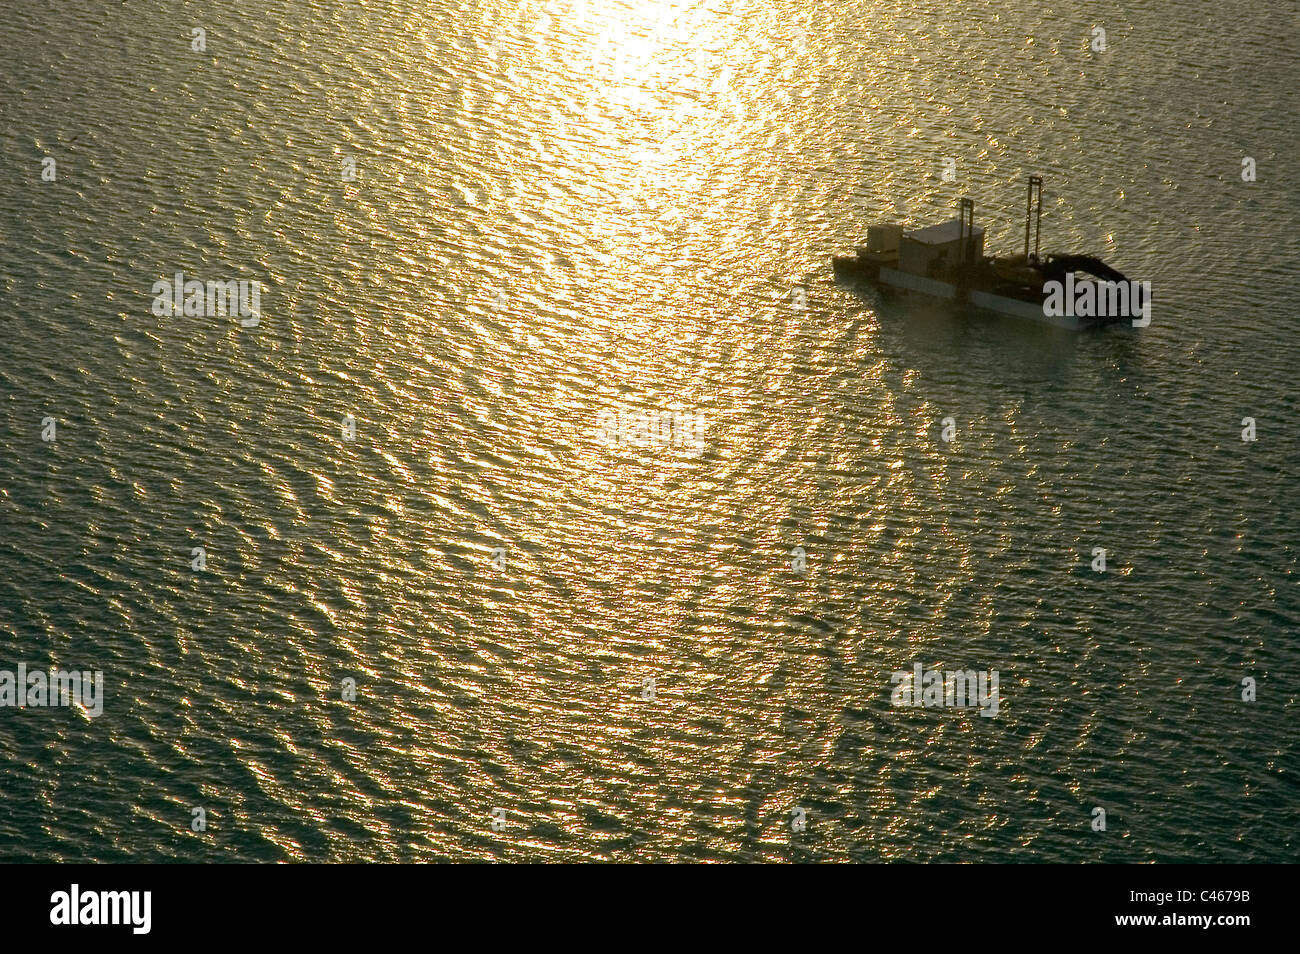 Aerial photograph of a crane on a barge in the southern basin of the Dead sea at sunrise Stock Photo